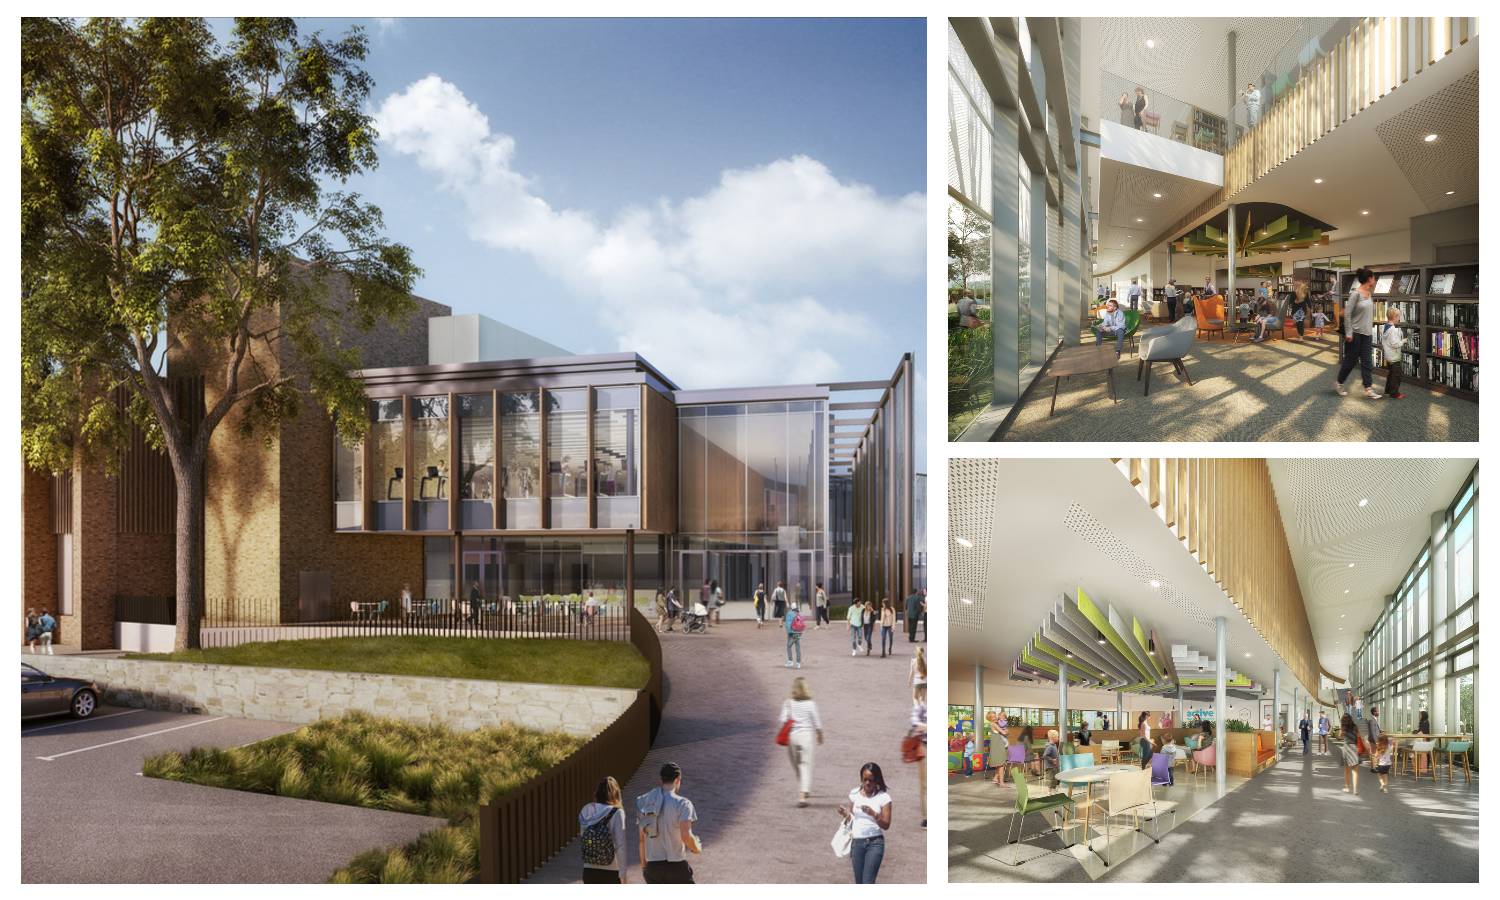 Leisure meets learning in new designs for Morpeth community hub